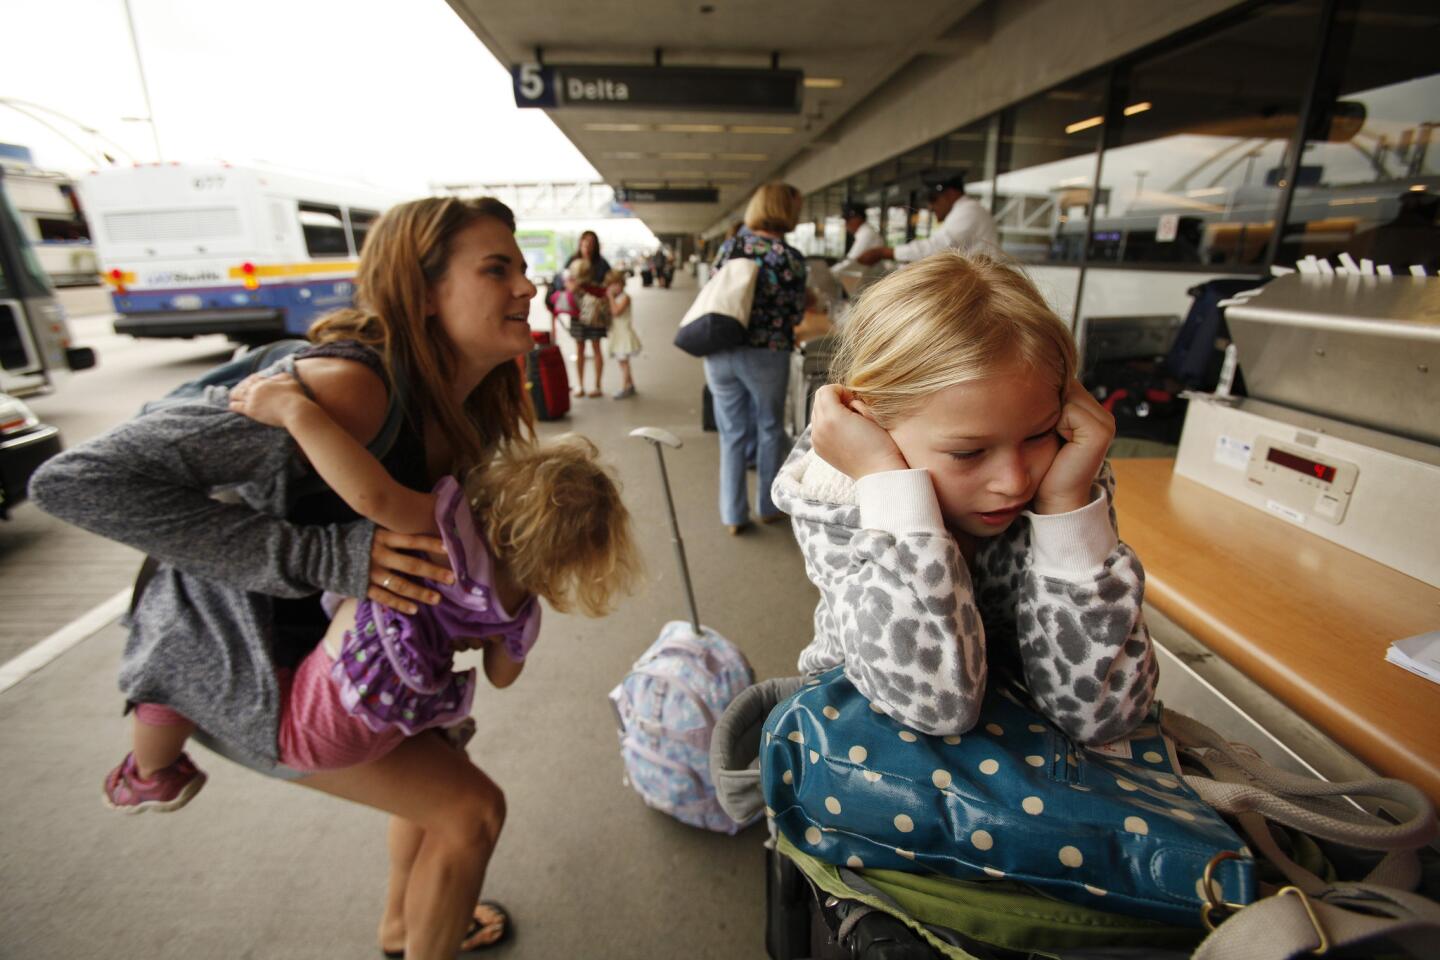 Julia Stein, 7, right, seems a little frustrated as the family heads out on a Florida cruise. To the left, the family nanny, Jai Lust, tries to corral Julia's younger sister, Scarlet, 2.